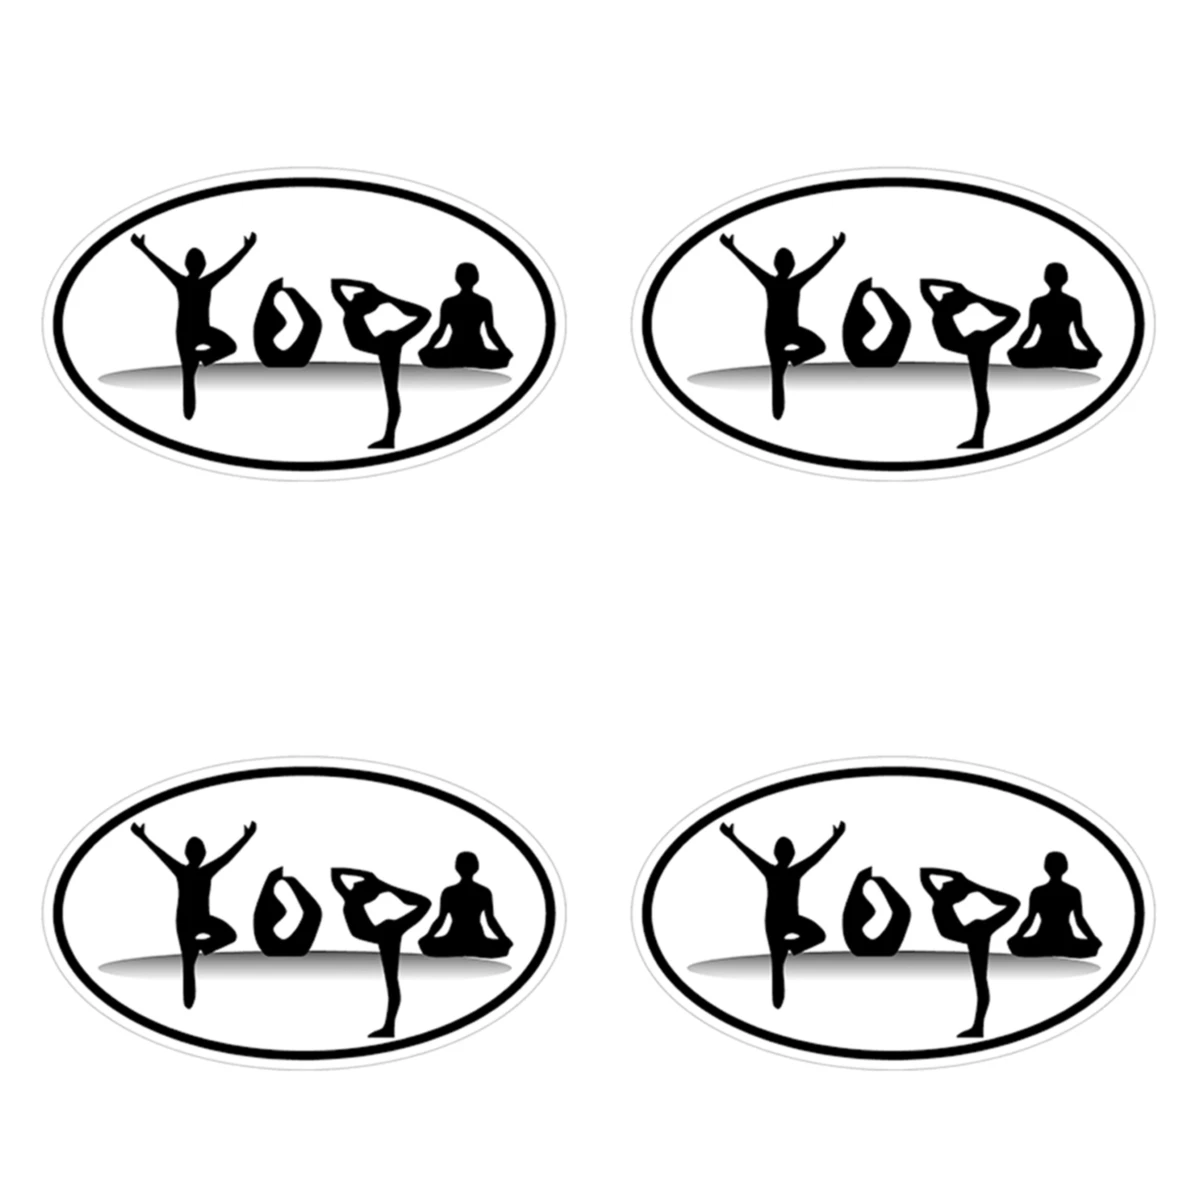 

Funny Warning Sign Stickers for Car Yoga Poses Euro Meditation Zen Om Peace Vinyl Decal Stickers Car Waterproof Pvc 13cm X 7.8cm